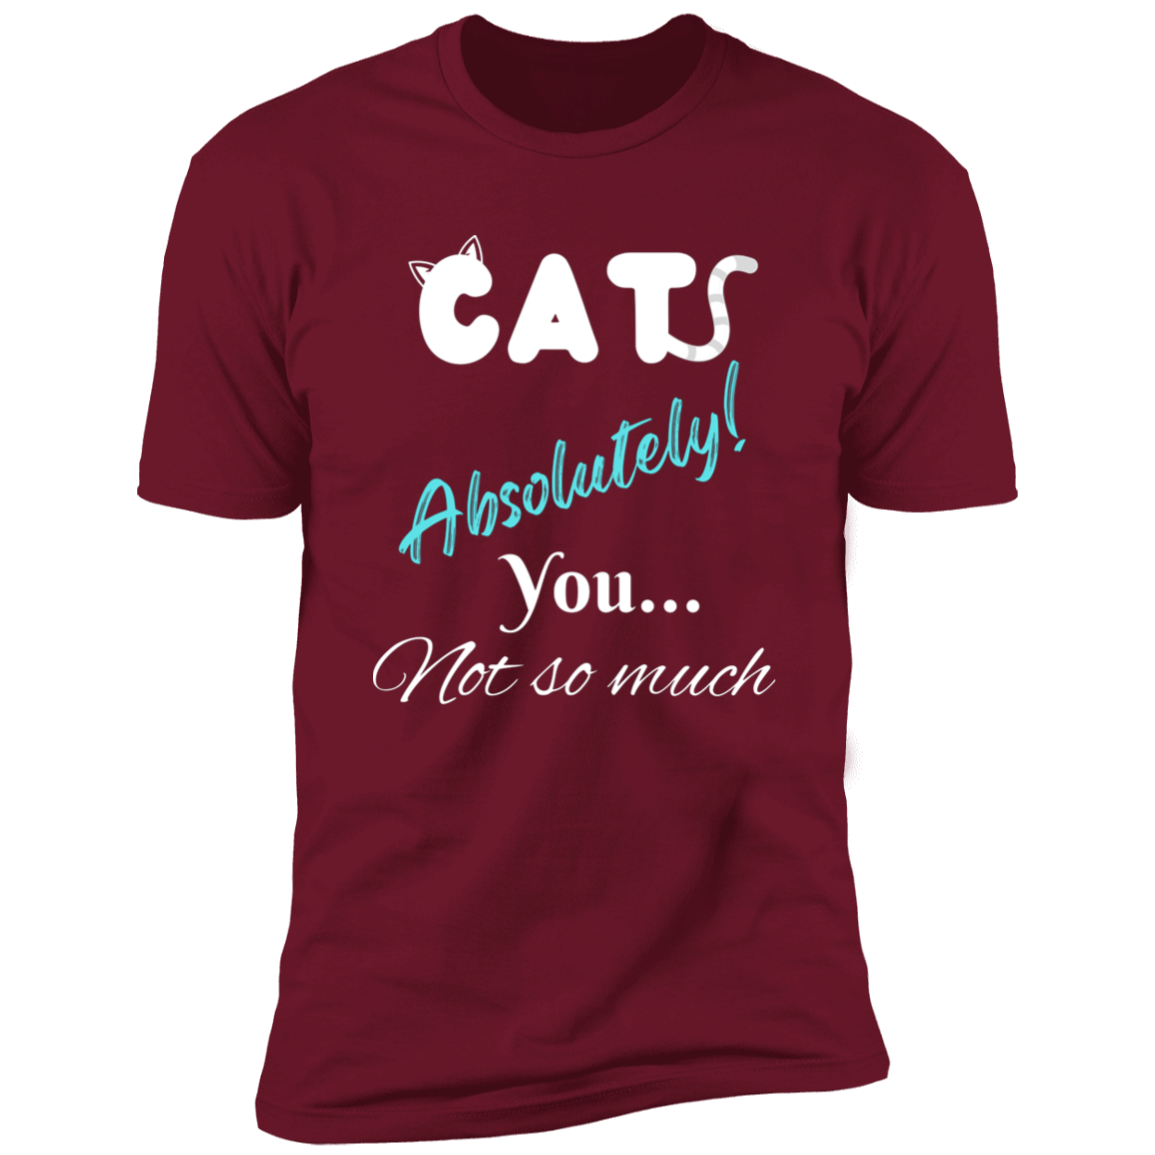 Cats Absolutely You Not So Much T-shirt, Cat Shirt for humans , in cardinal red